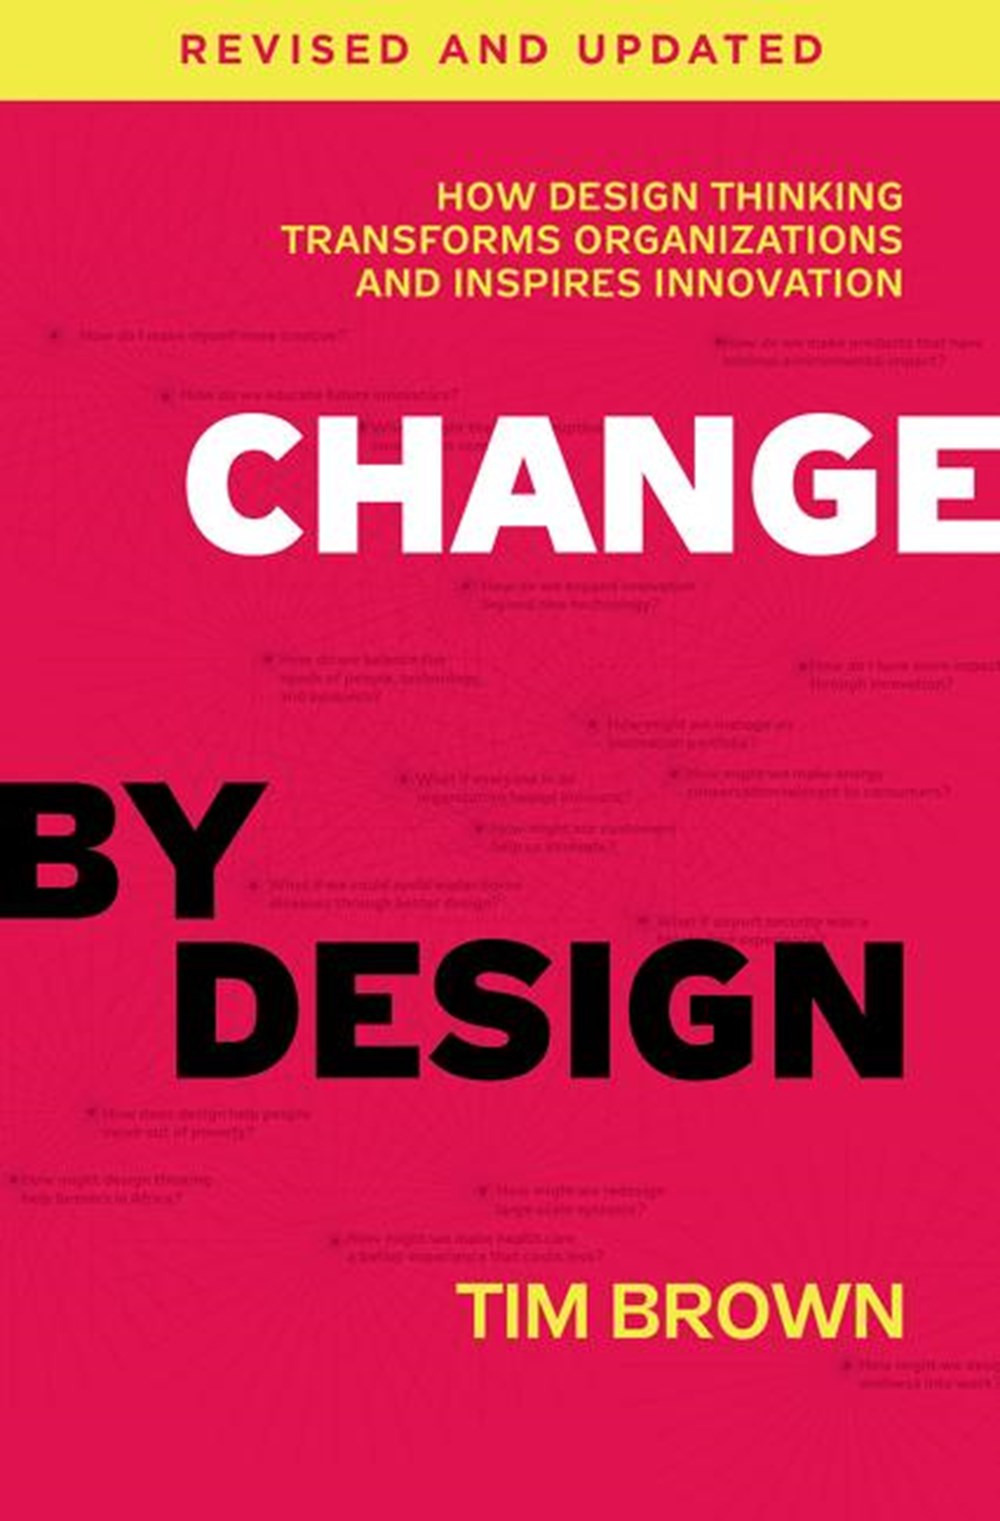 Change by Design How Design Thinking Transforms Organizations and Inspires Innovation